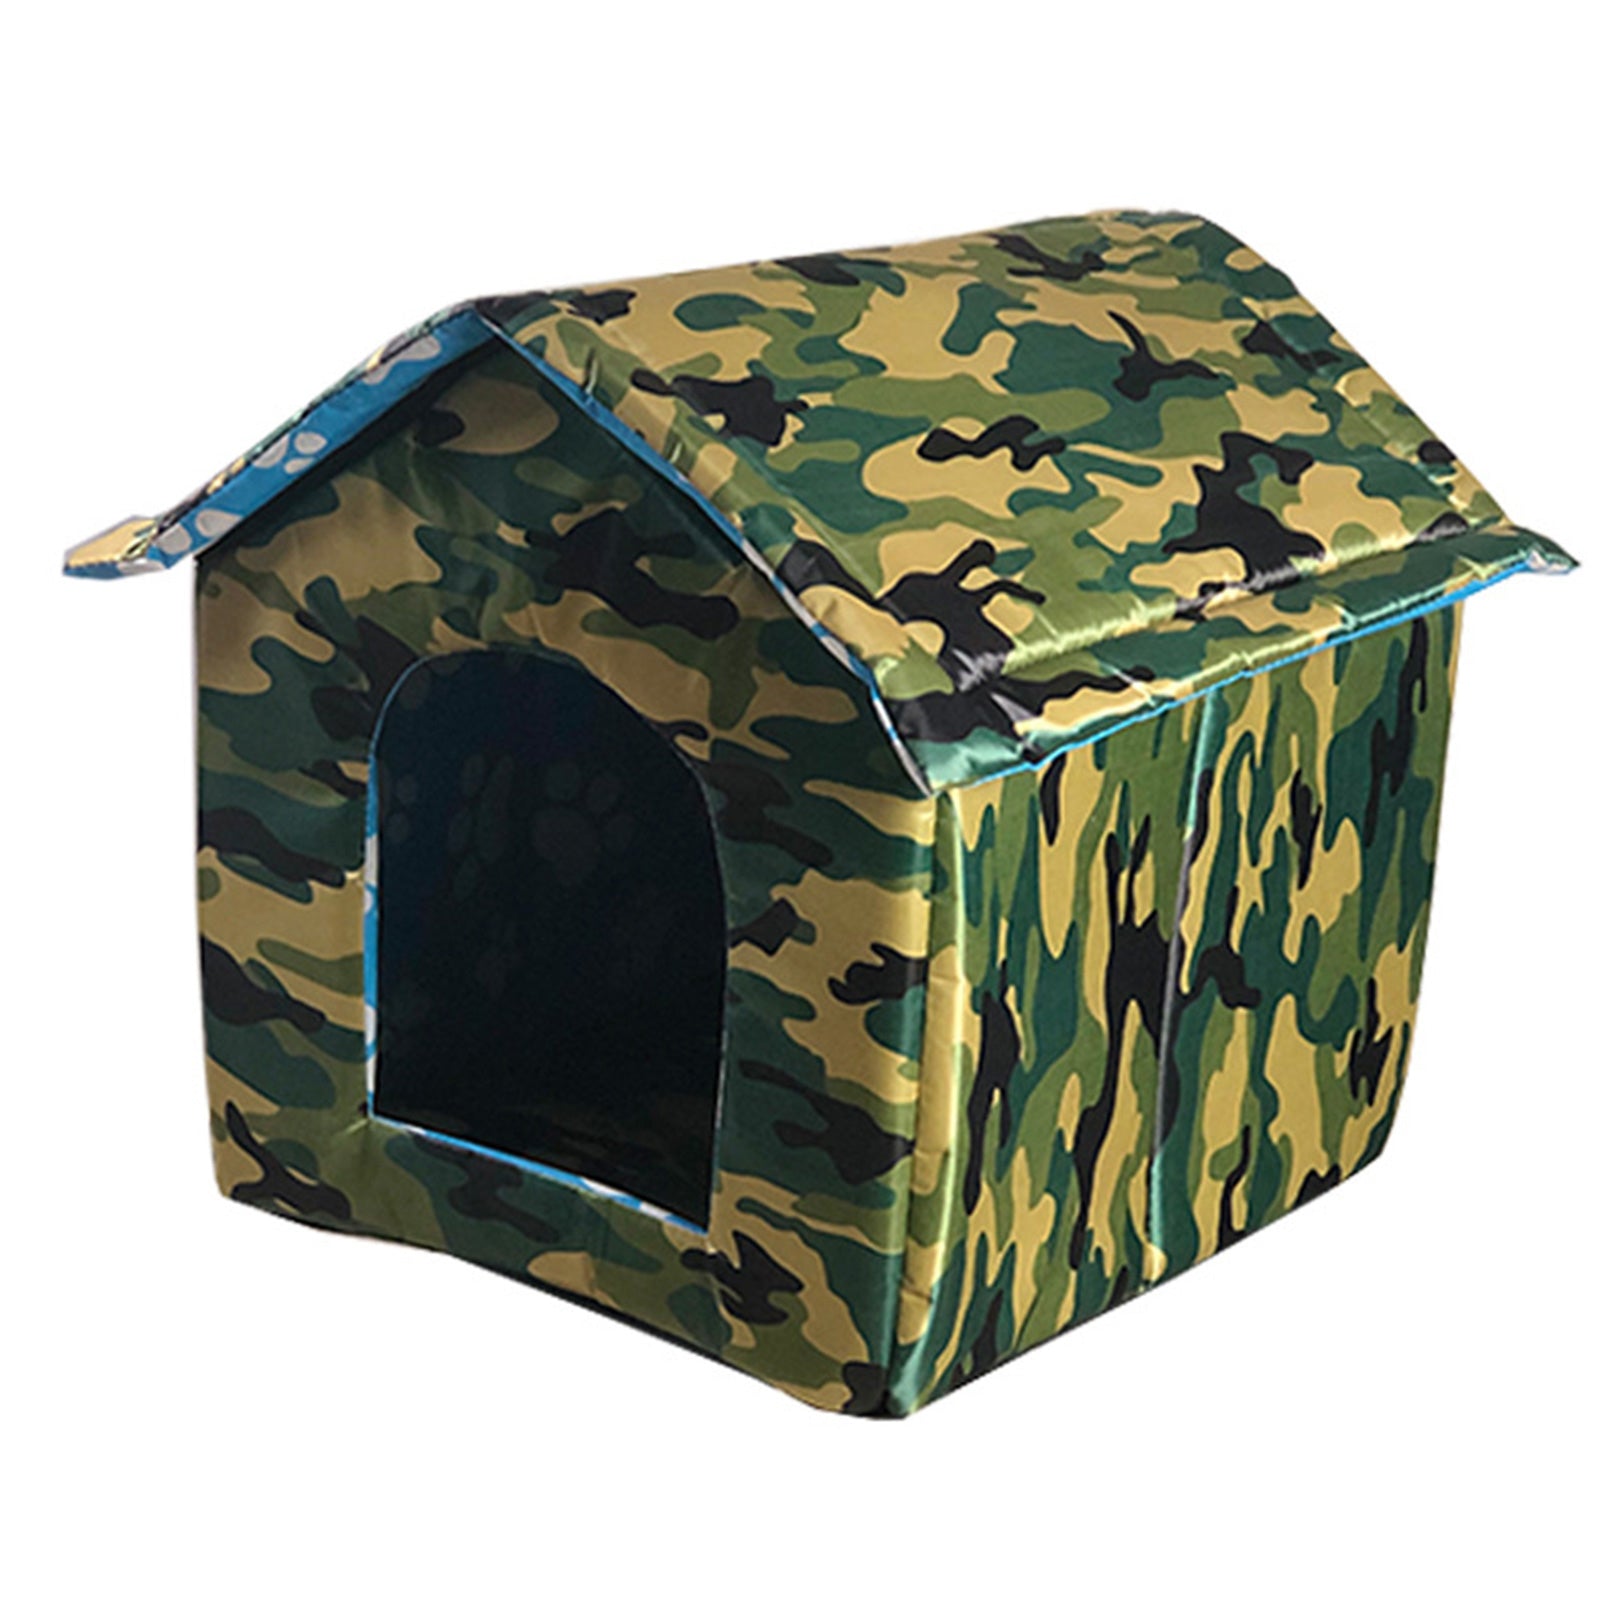 Flm Waterproof Dog House Lovely Wear-Resistant Foldable Pet Shelter for Home